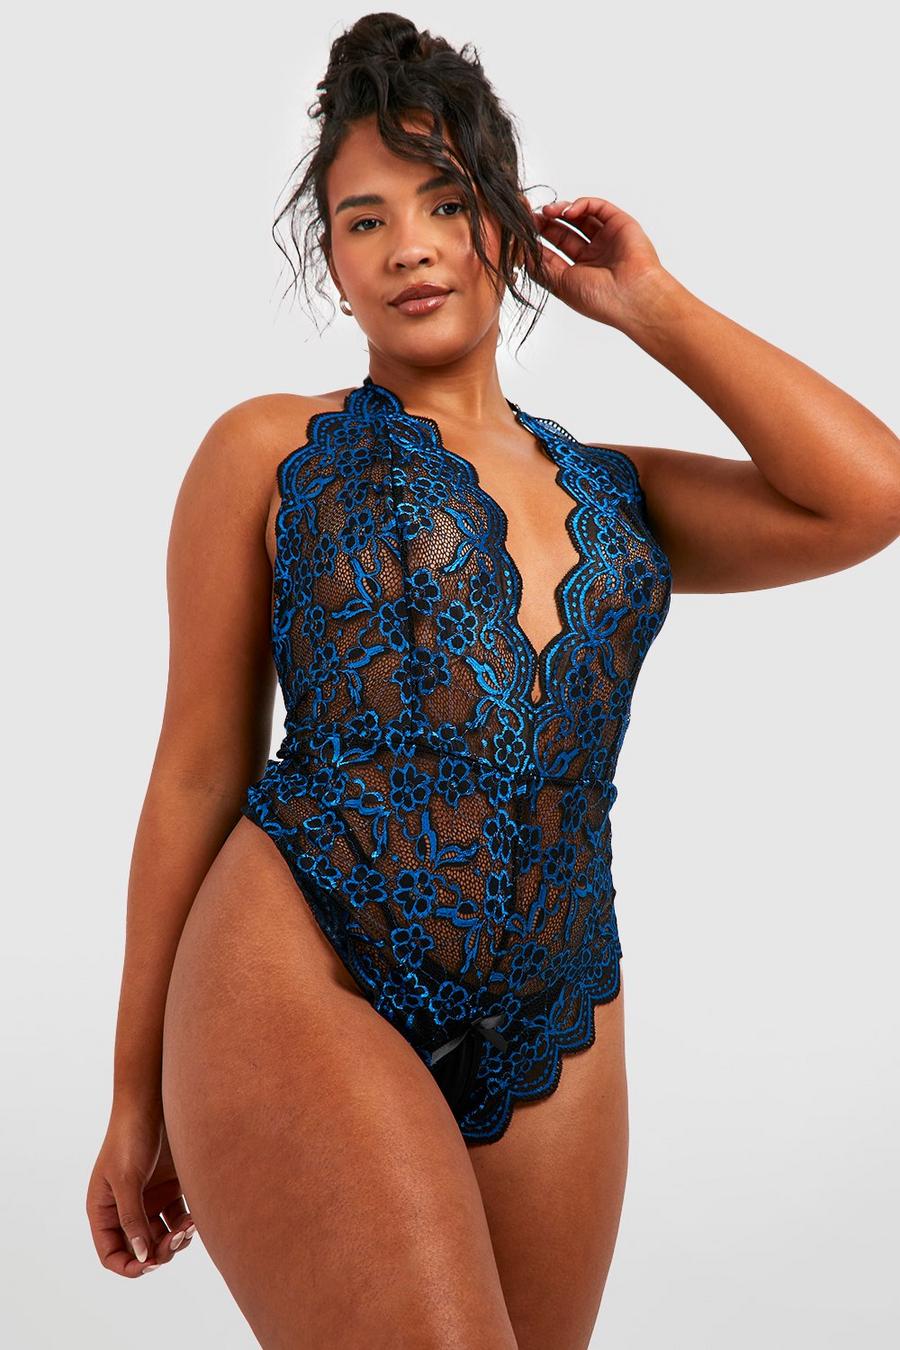 Sexy Lingerie for Women Plus Size Crotchless Full Coverage Lace